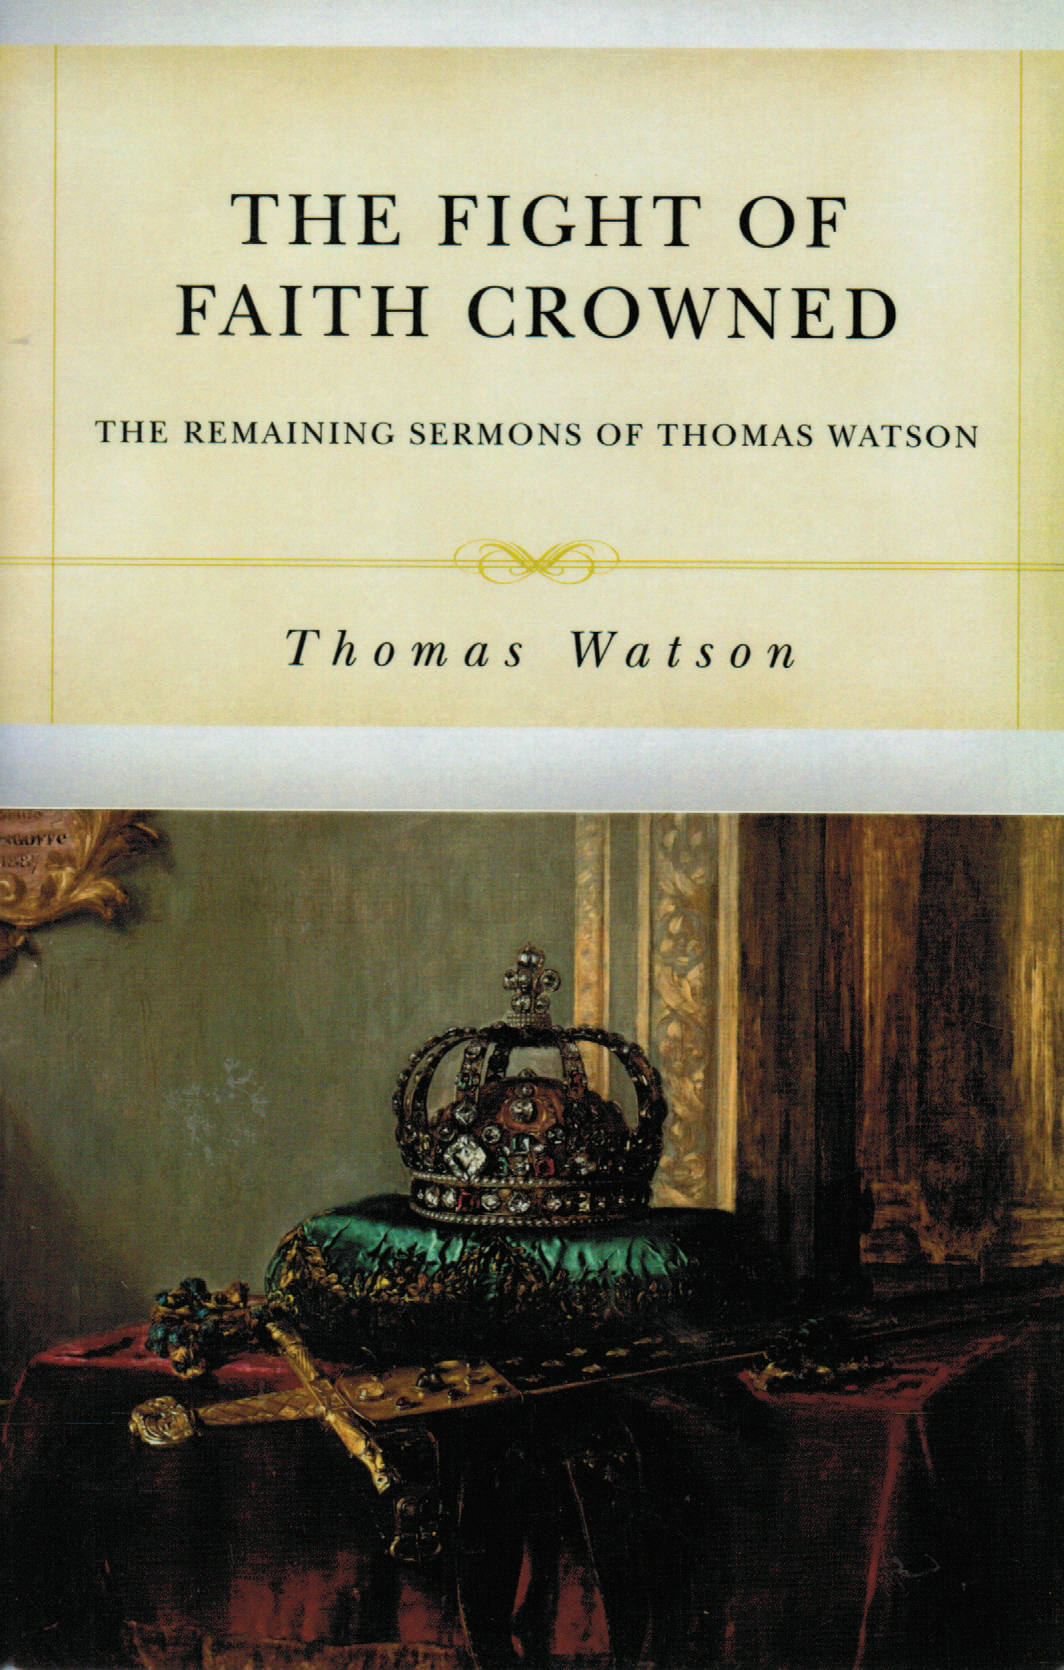 The Fight of Faith Crowned: The Remaining Sermons of Thomas Watson